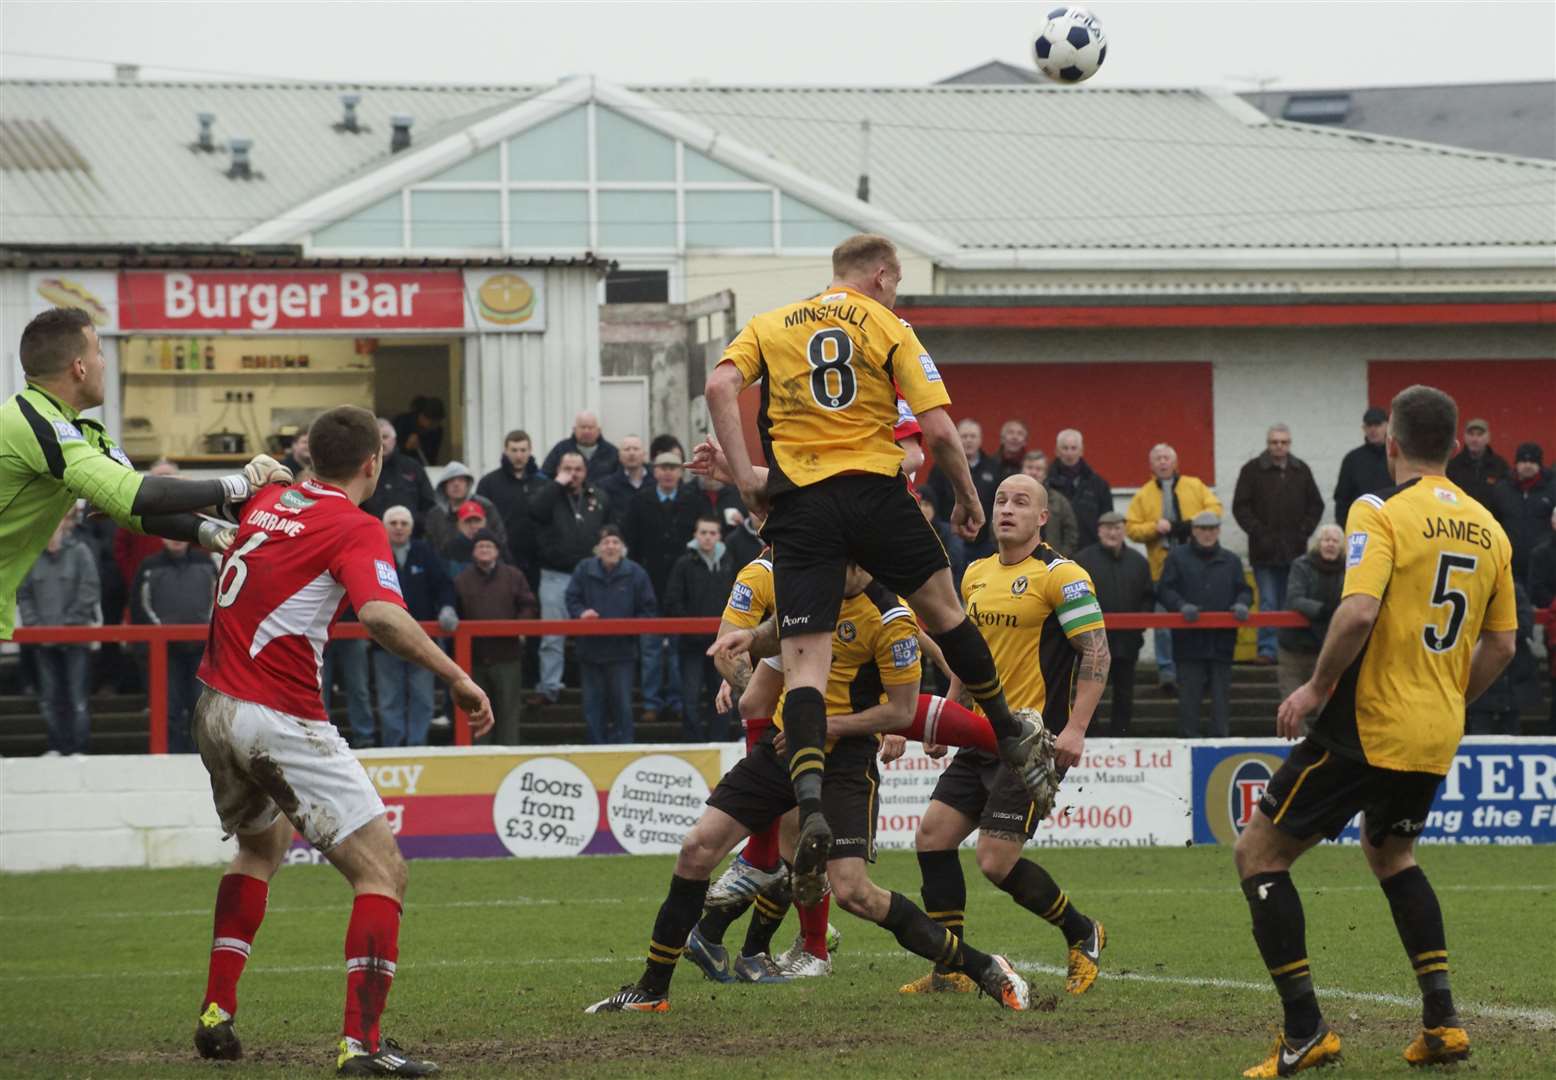 Lee Minshull (No.8) helped Newport reach the Football League after leaving AFC Wimbledon. Picture: Andy Payton